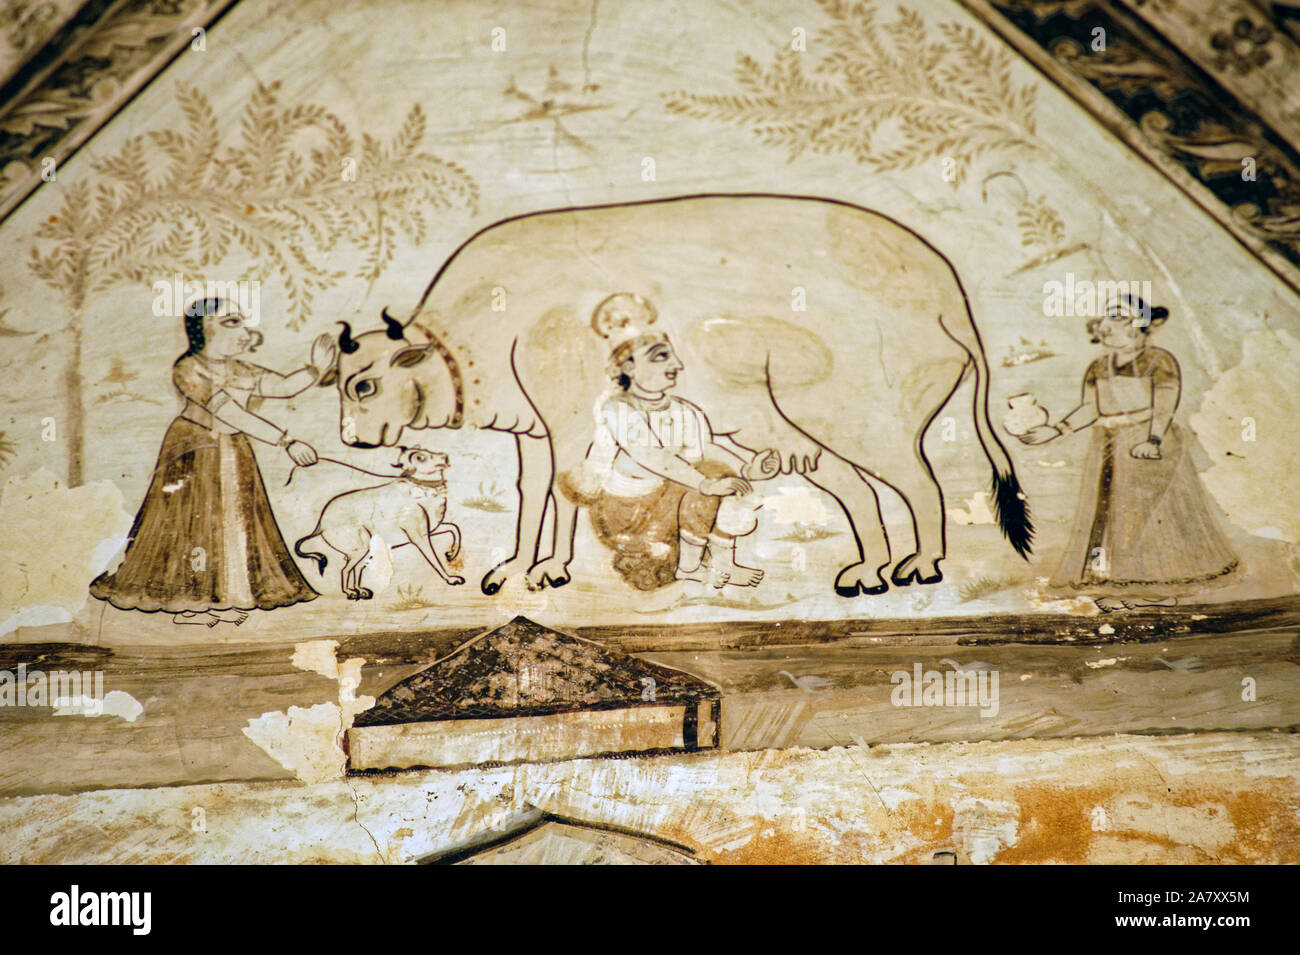 Painting of Krishna  milking a cow by hand Stock Photo